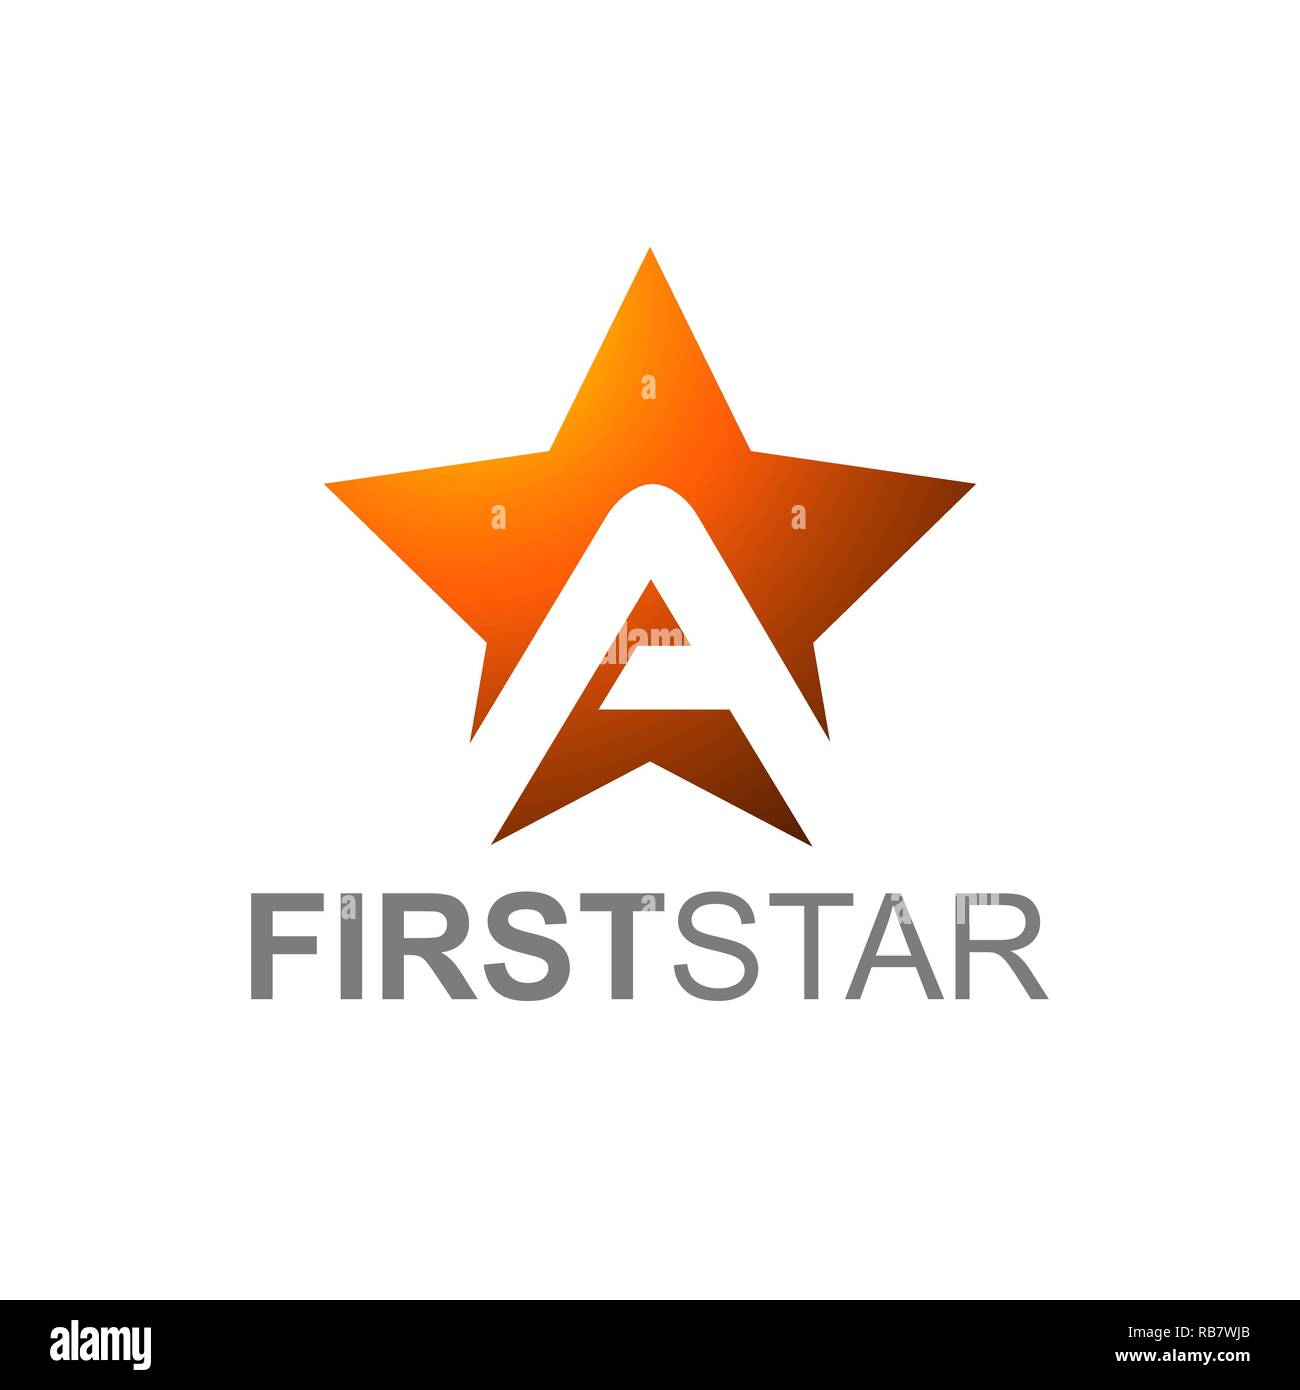 Orange Star Logo With Letter A with first star text in white Background Stock Vector